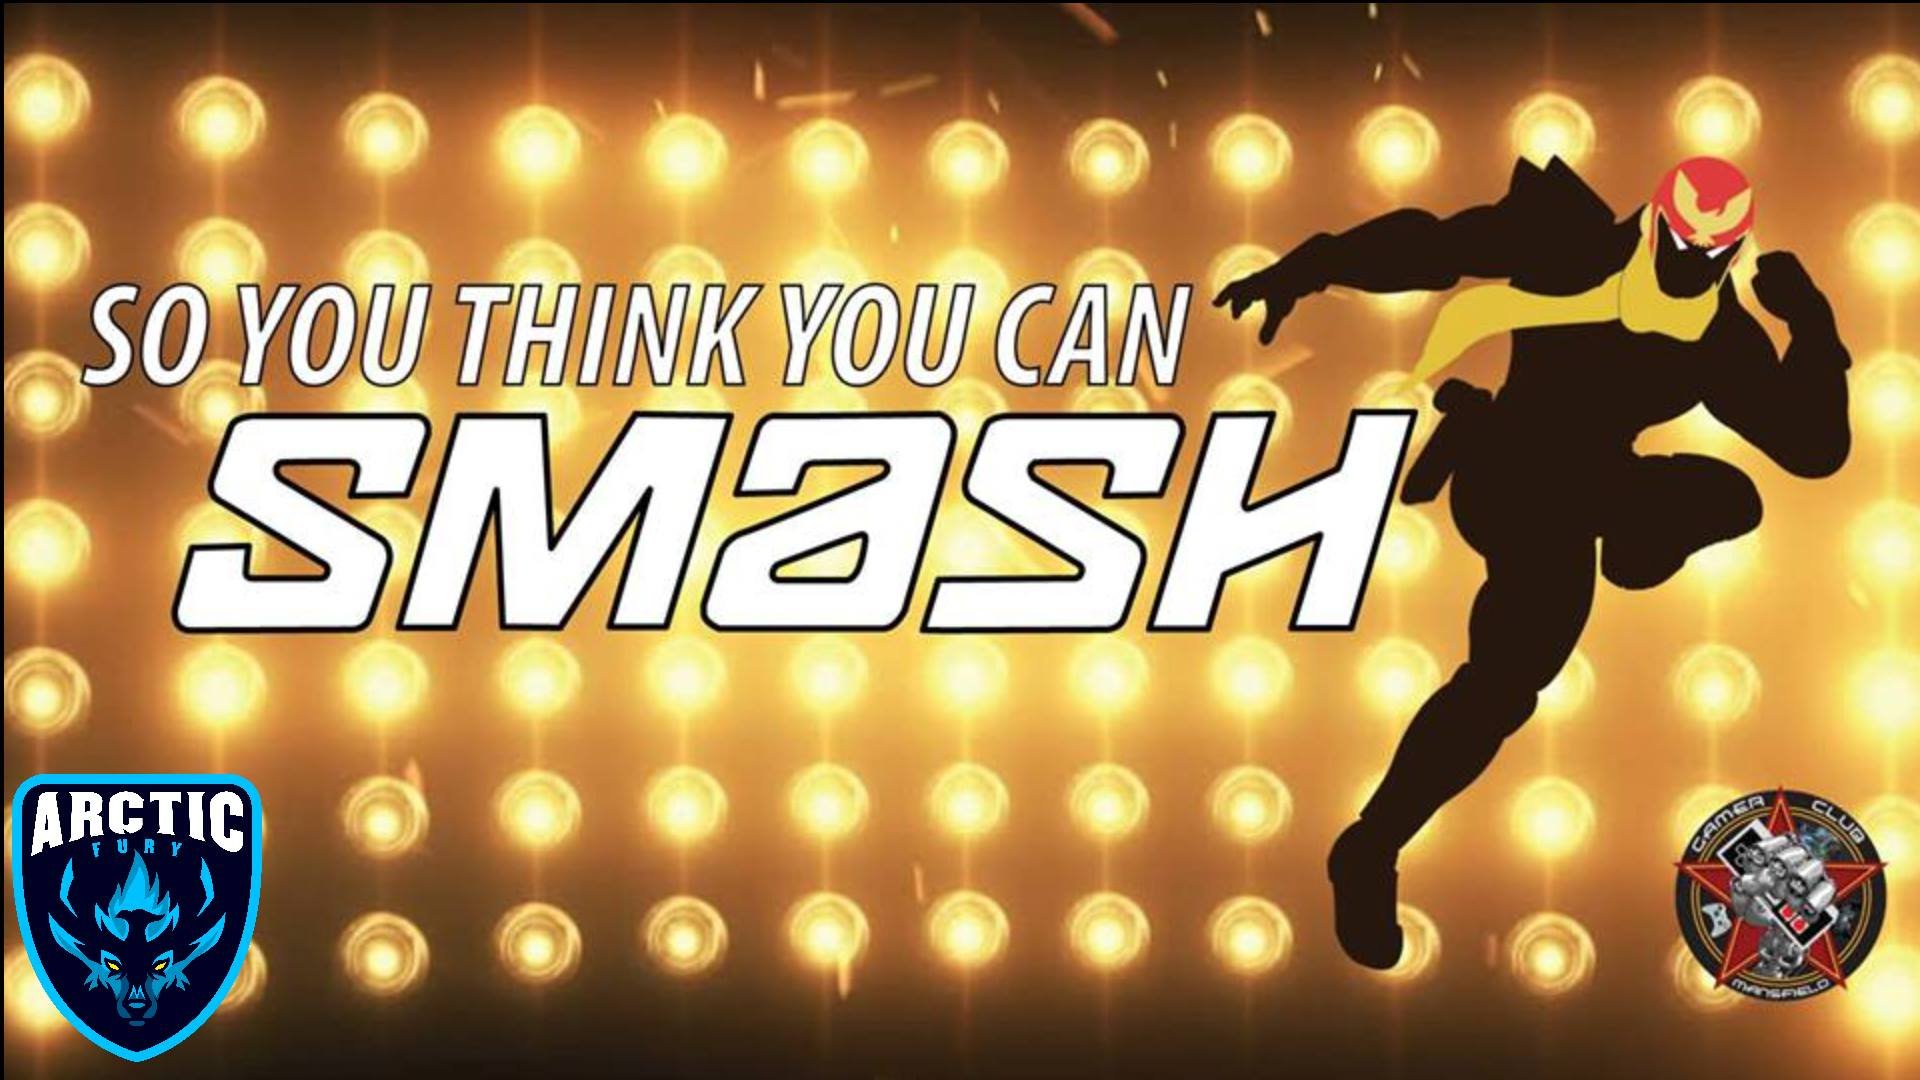 So You Think You Can Smash | Episode 4 - Wii U Singles